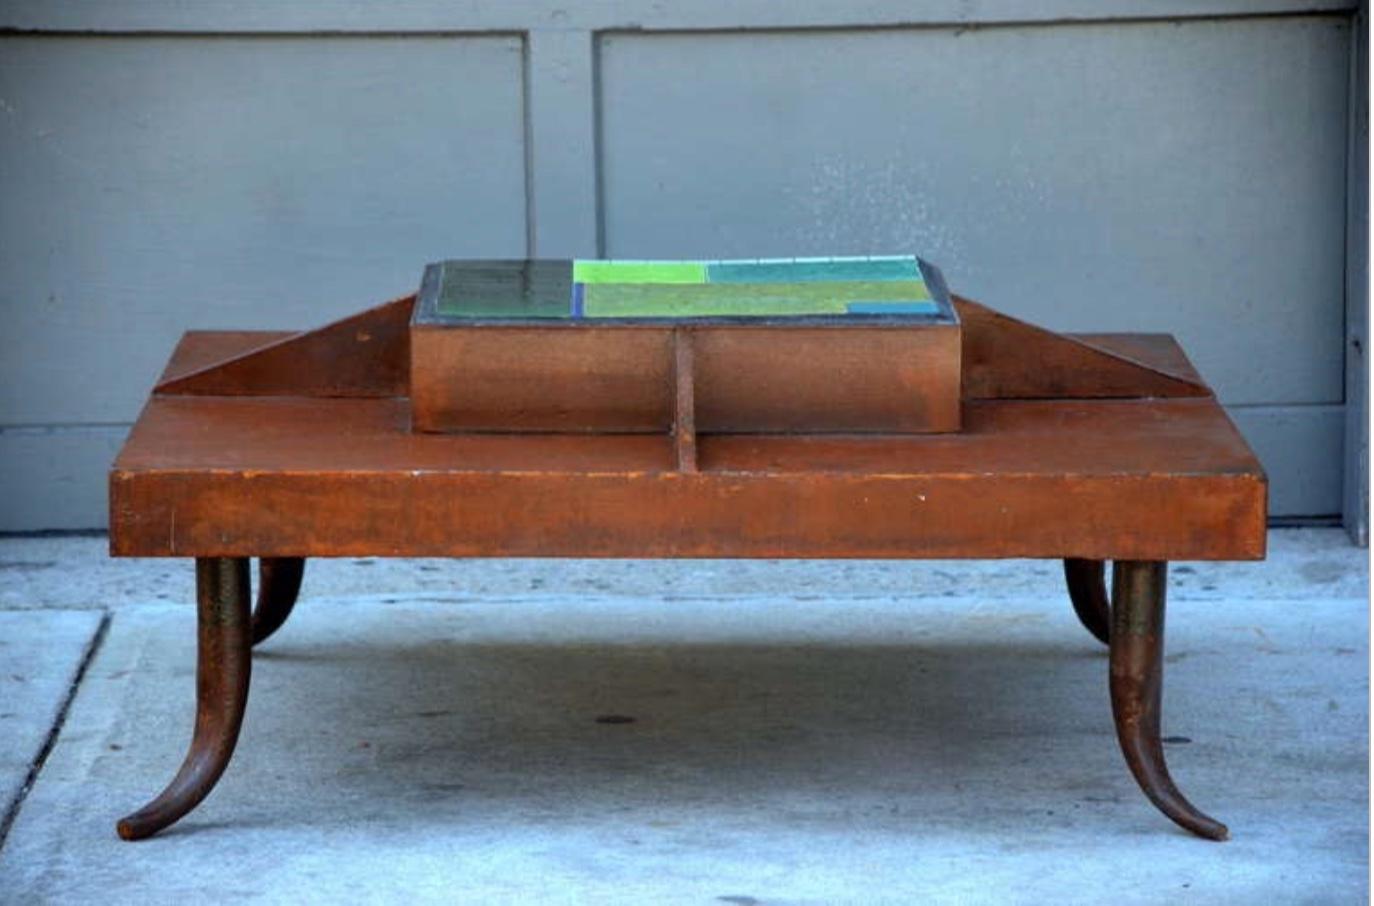 20th Century One-of-a-Kind Patinated Steel and Tile Studio Art Coffee Table For Sale